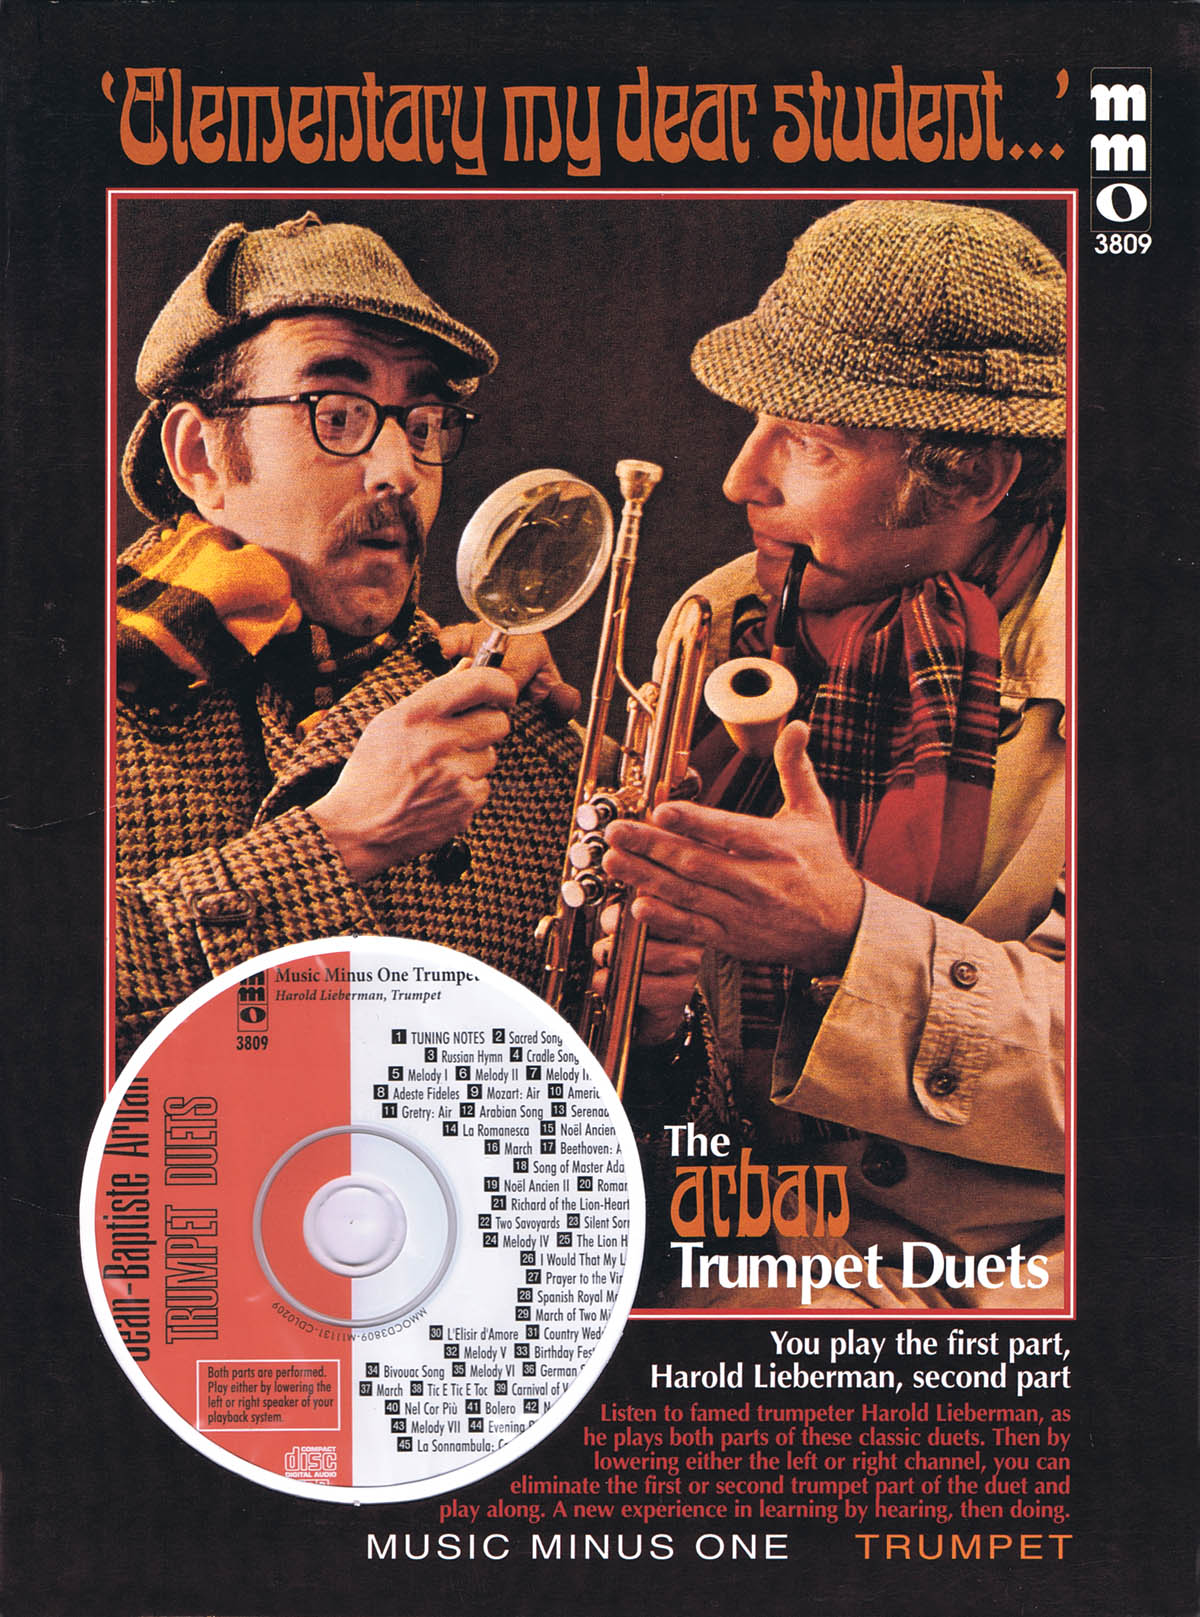 The Arban Trumpet Duets